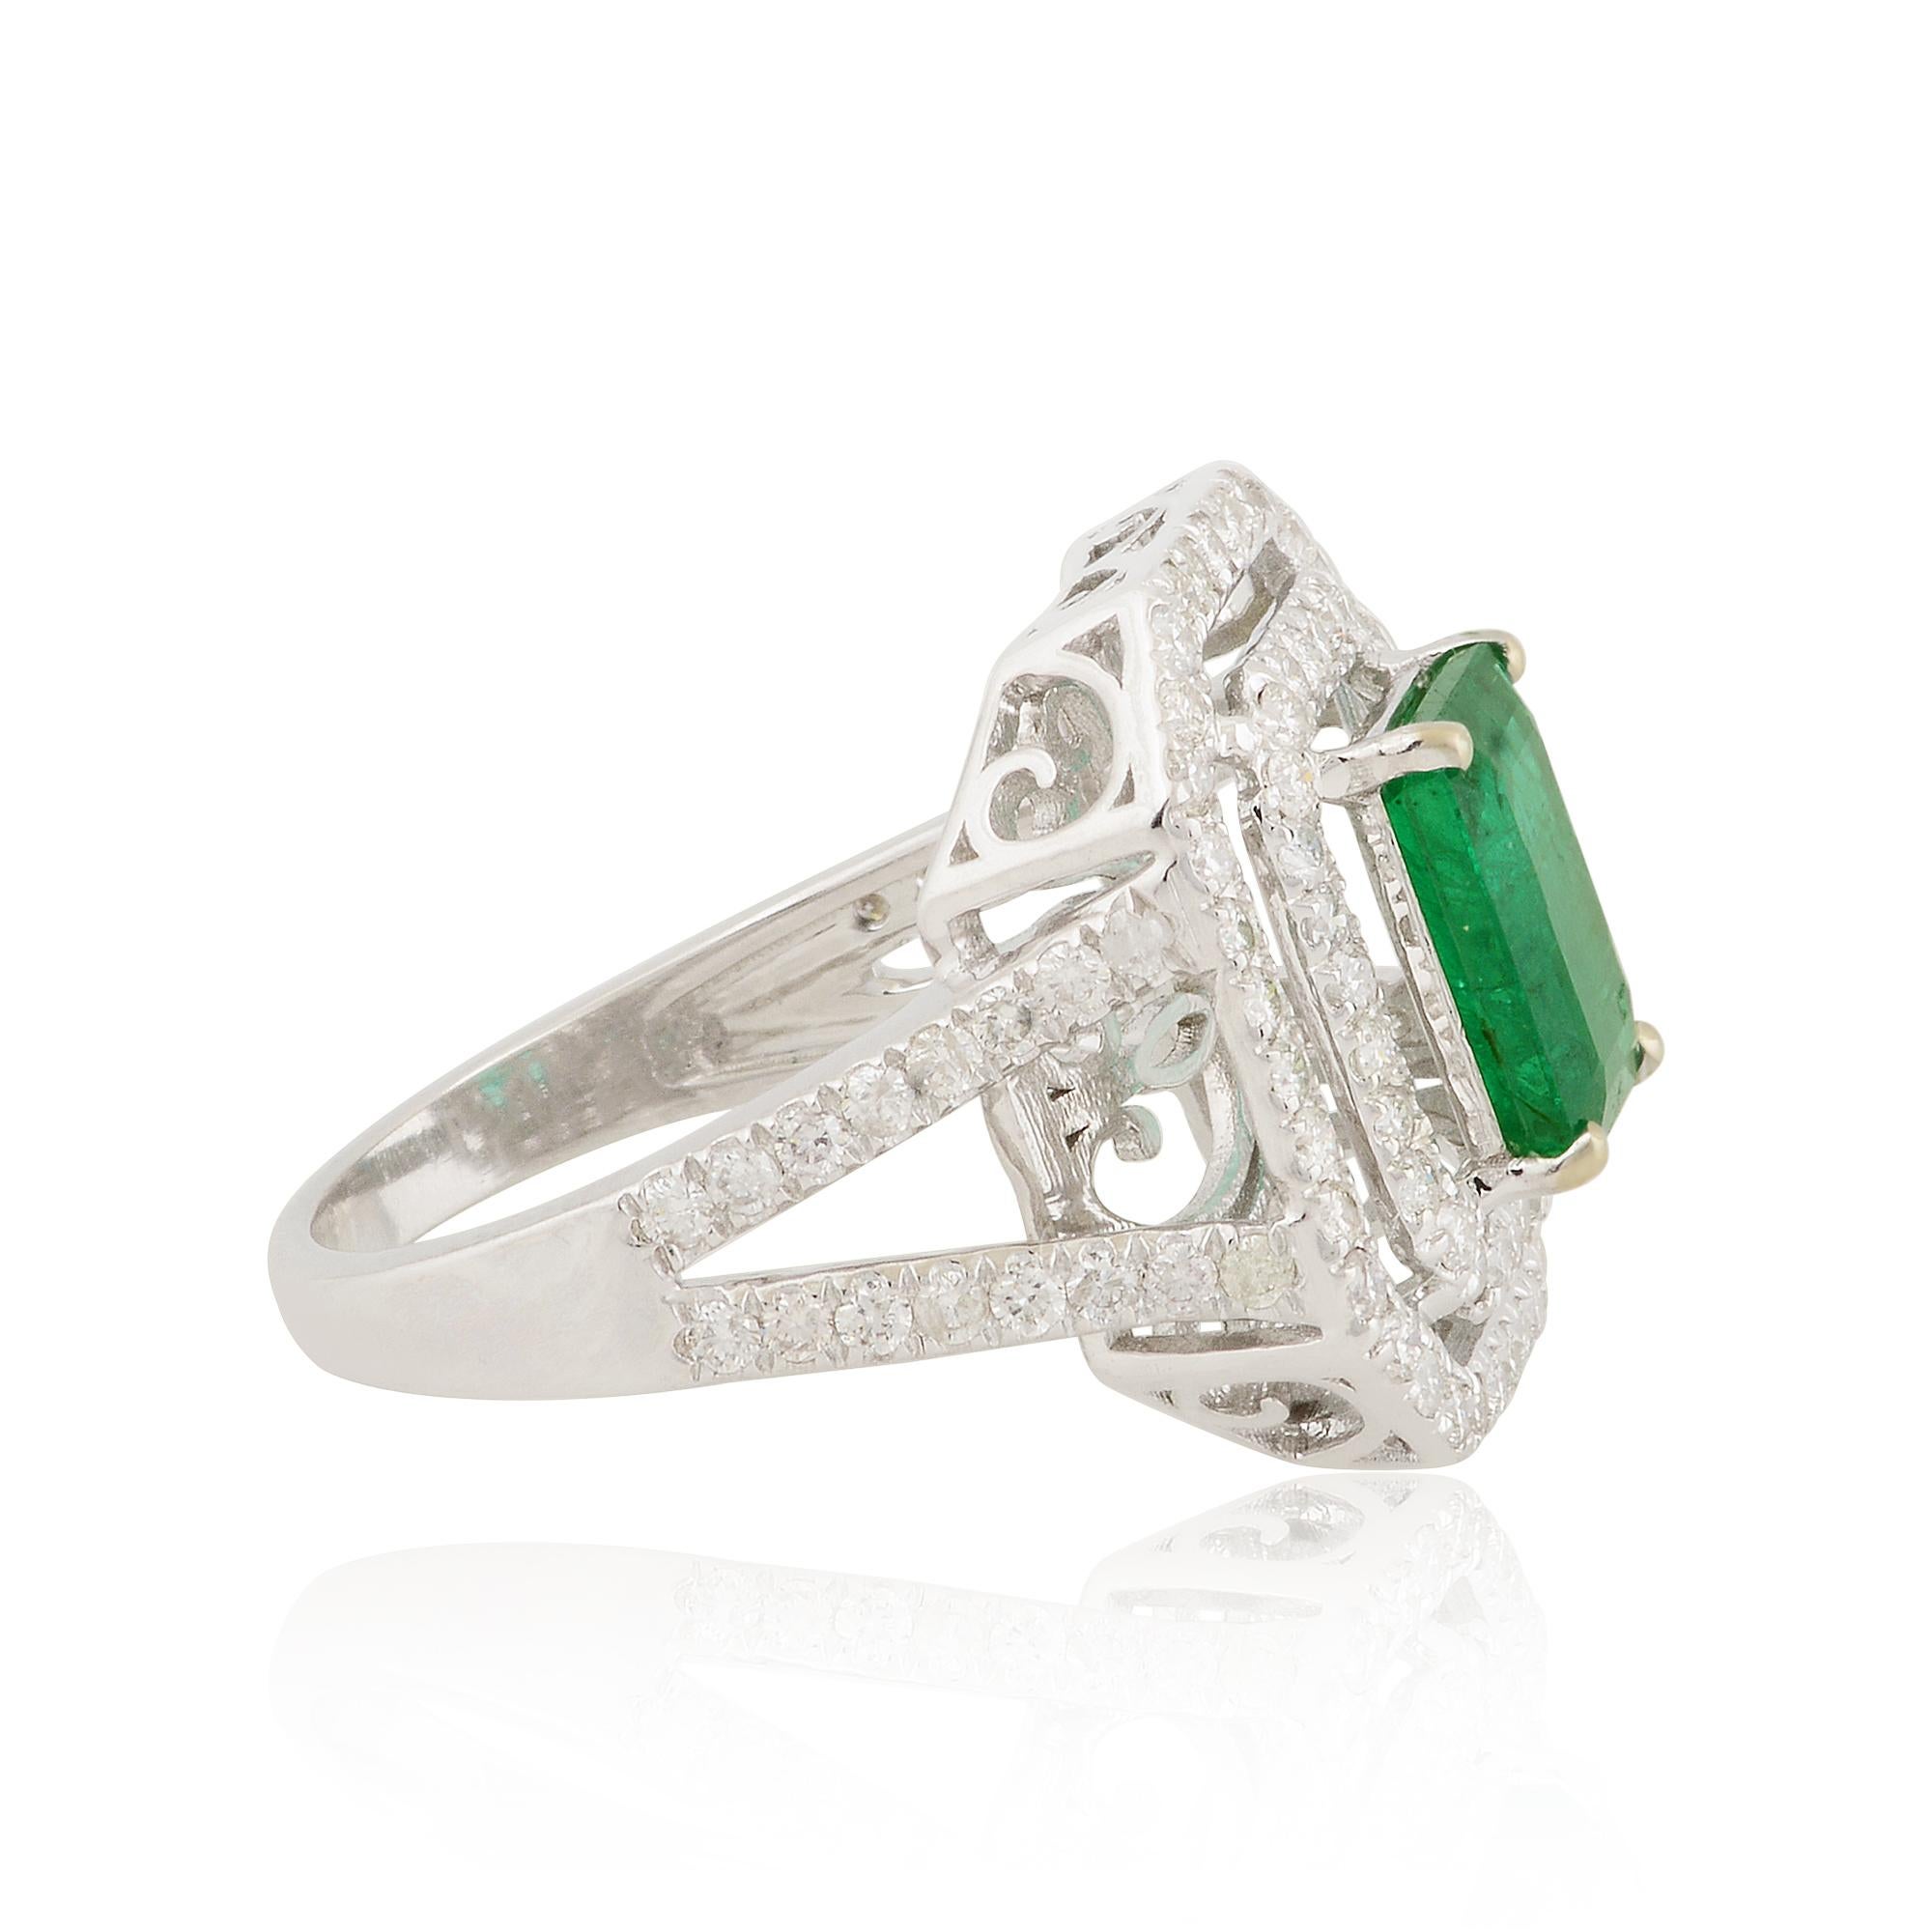 For Sale:  Natural Emerald Cocktail Ring Diamond Pave 10k White Gold Fine Handmade Jewelry 2